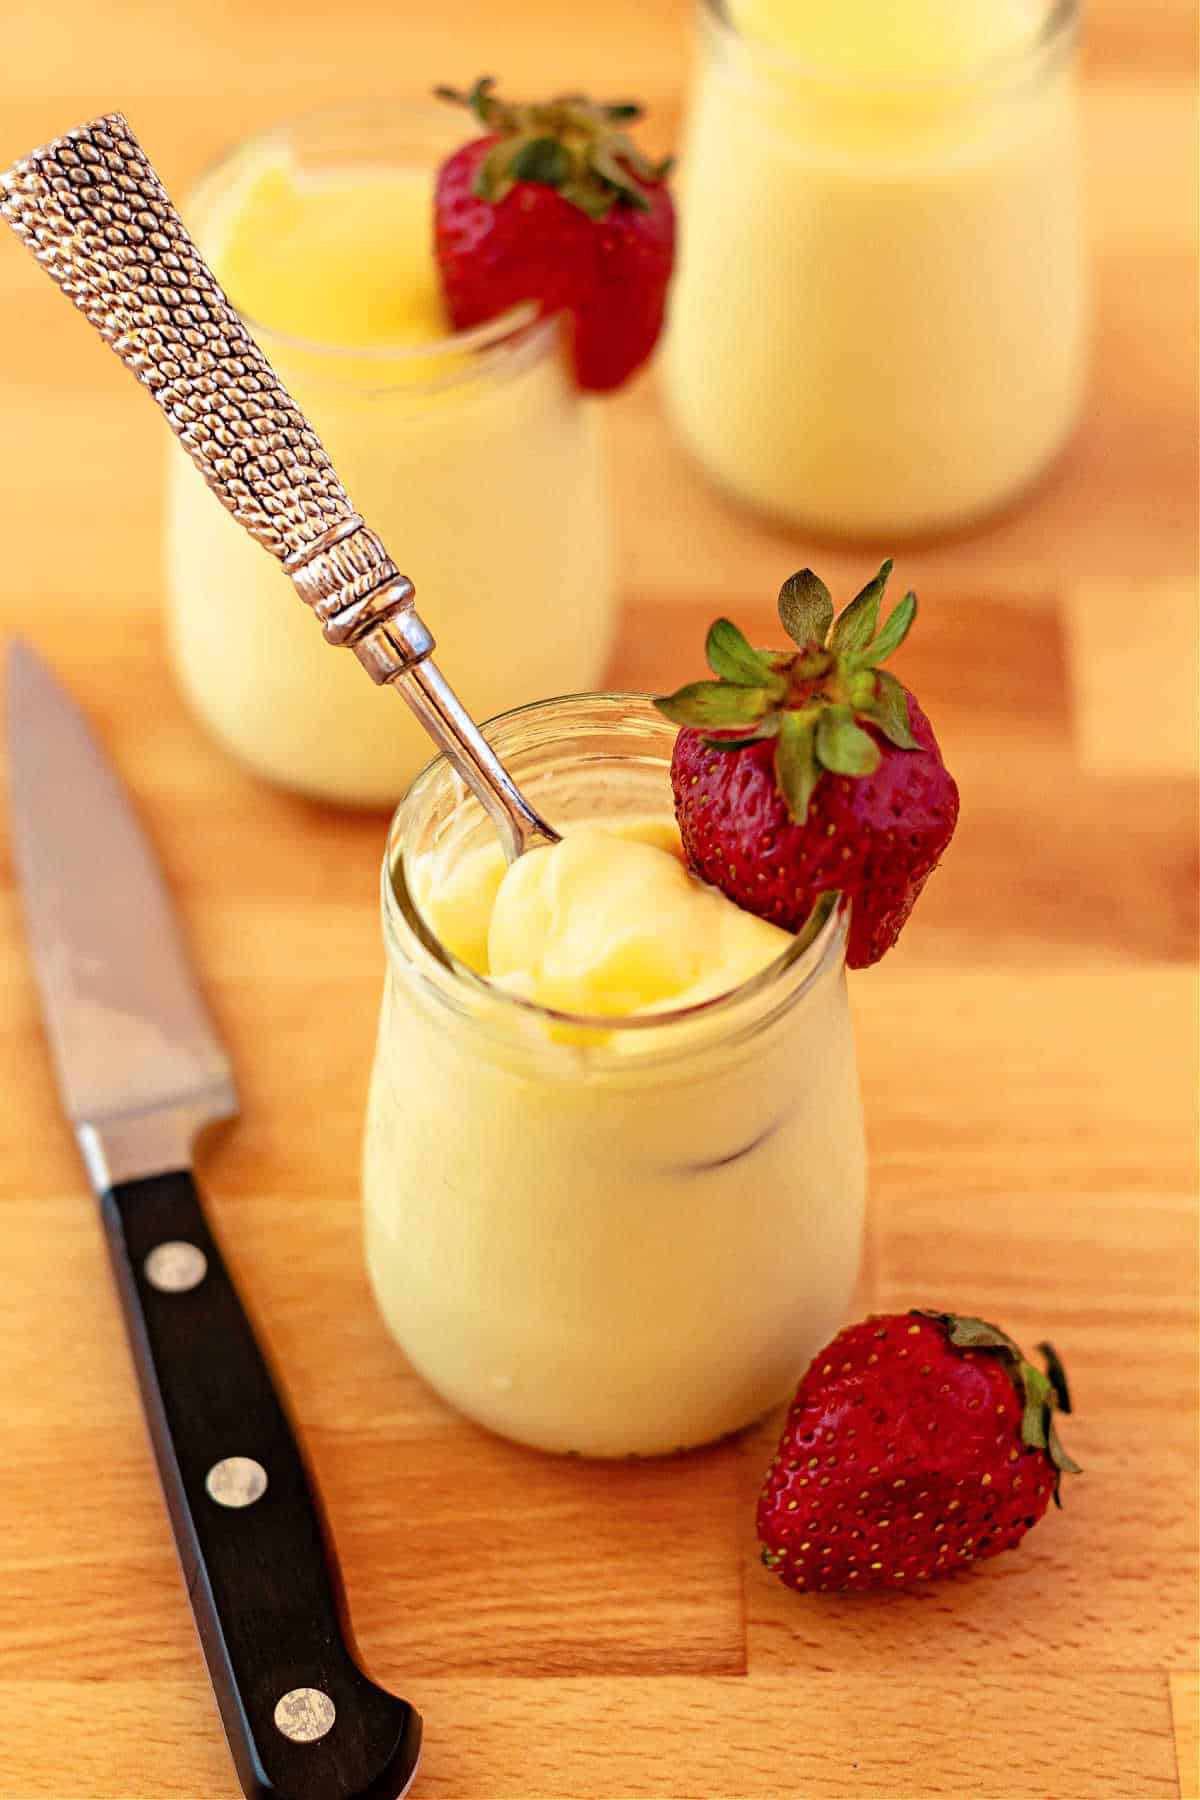 Three small clear glass jars filled with pale yellow lemon pudding. Two of the jars have a slit whole strawberry on their rims.